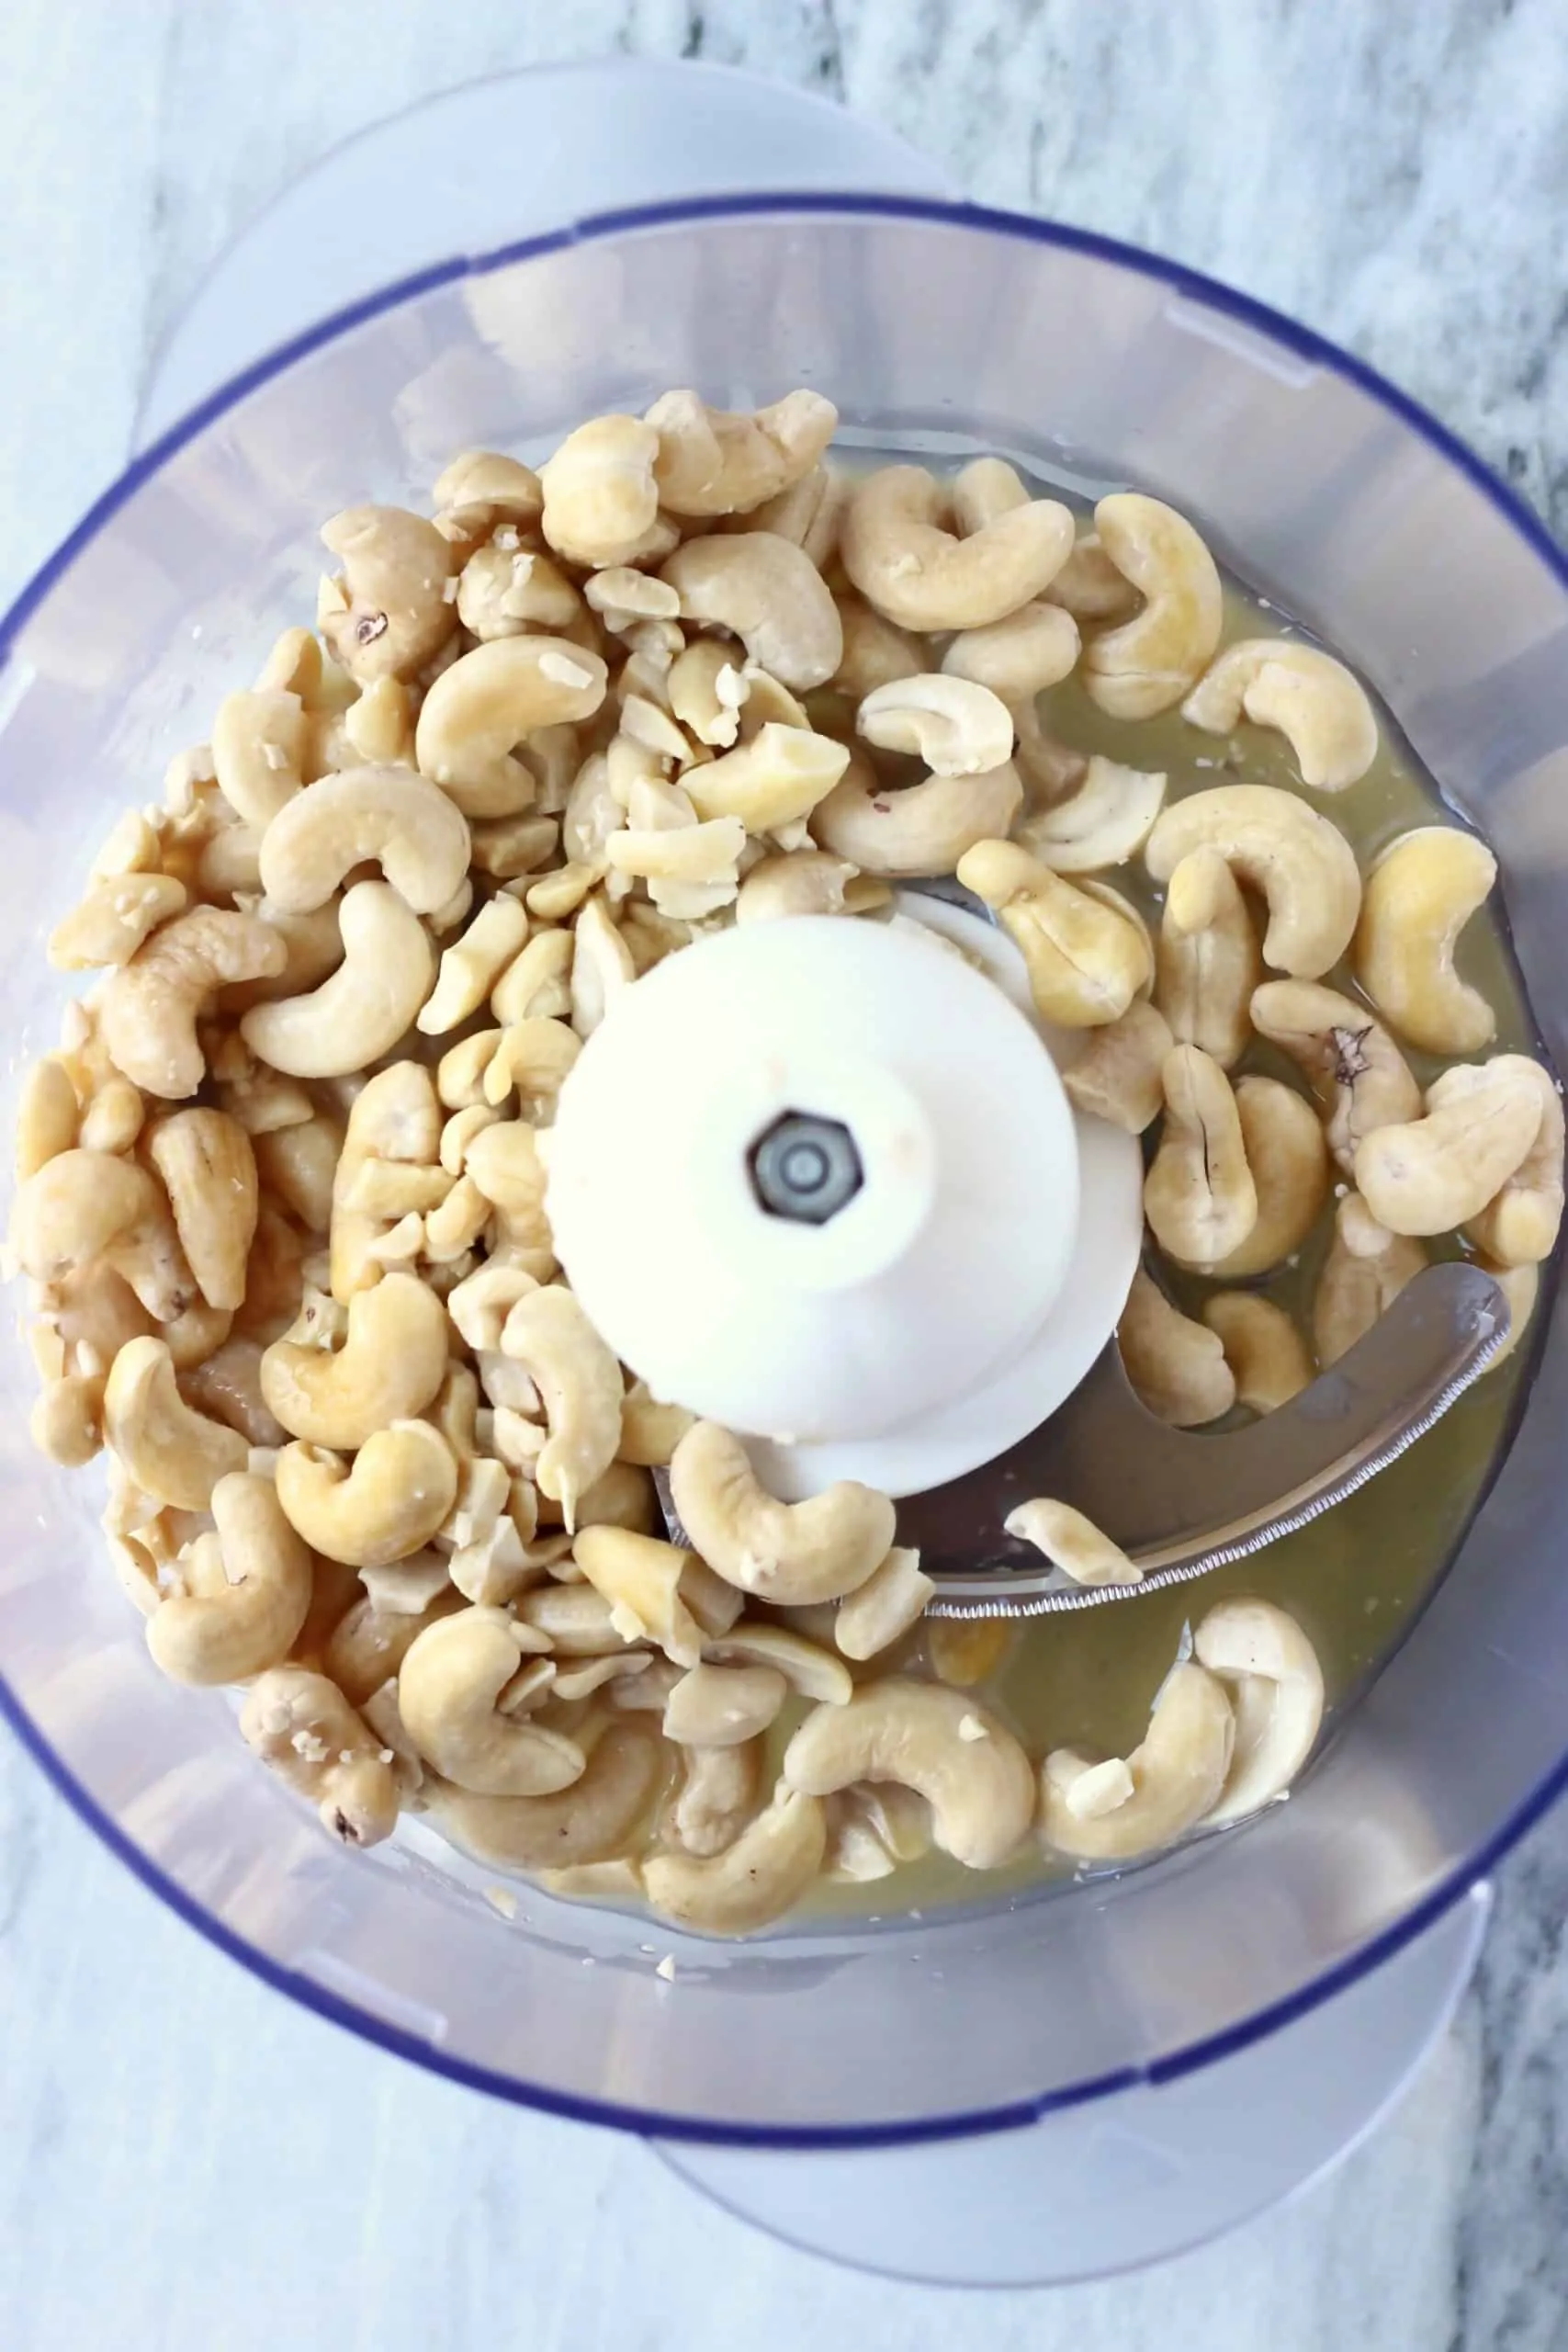 Cashew nuts, maple syrup and lemon juice in a food processor